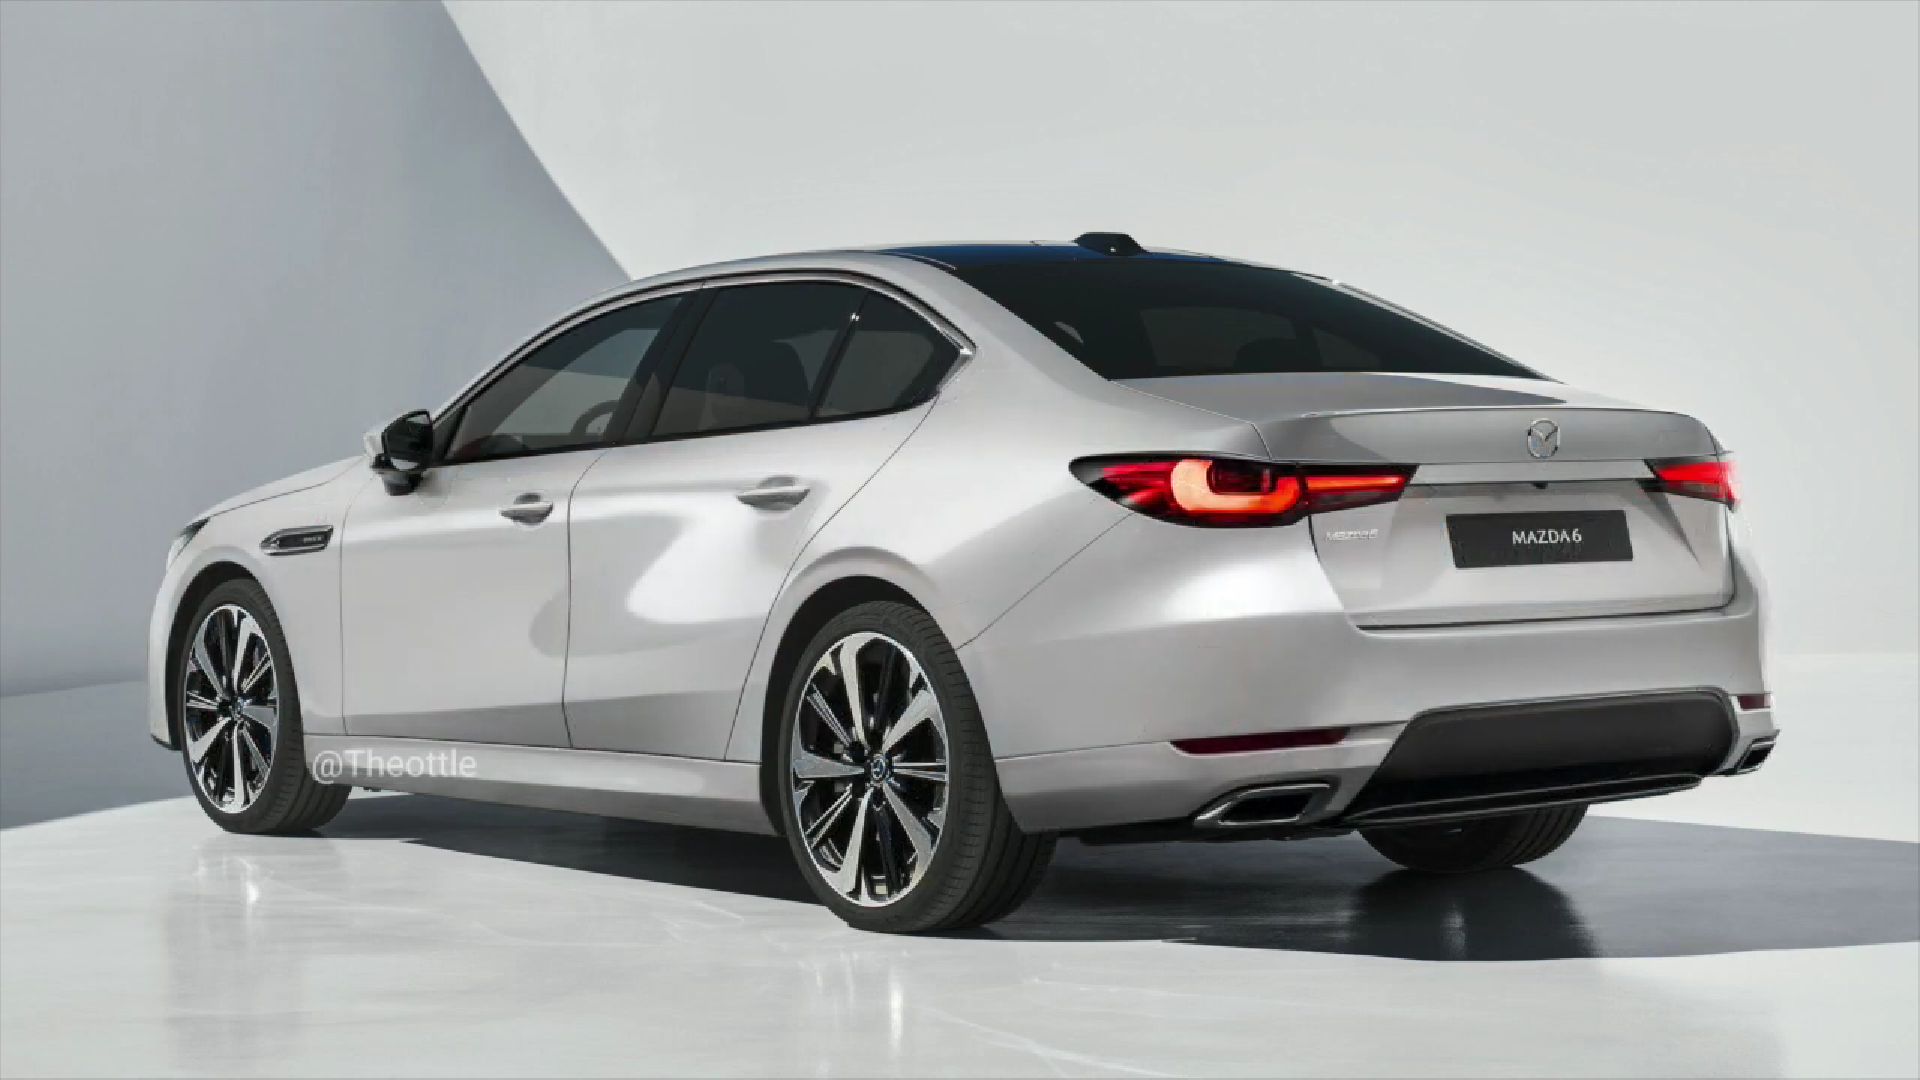 2025-mazda6-sedan-speculatively-rendered-new-generation-may-go-rwd-with-i6-engines-2.jpg